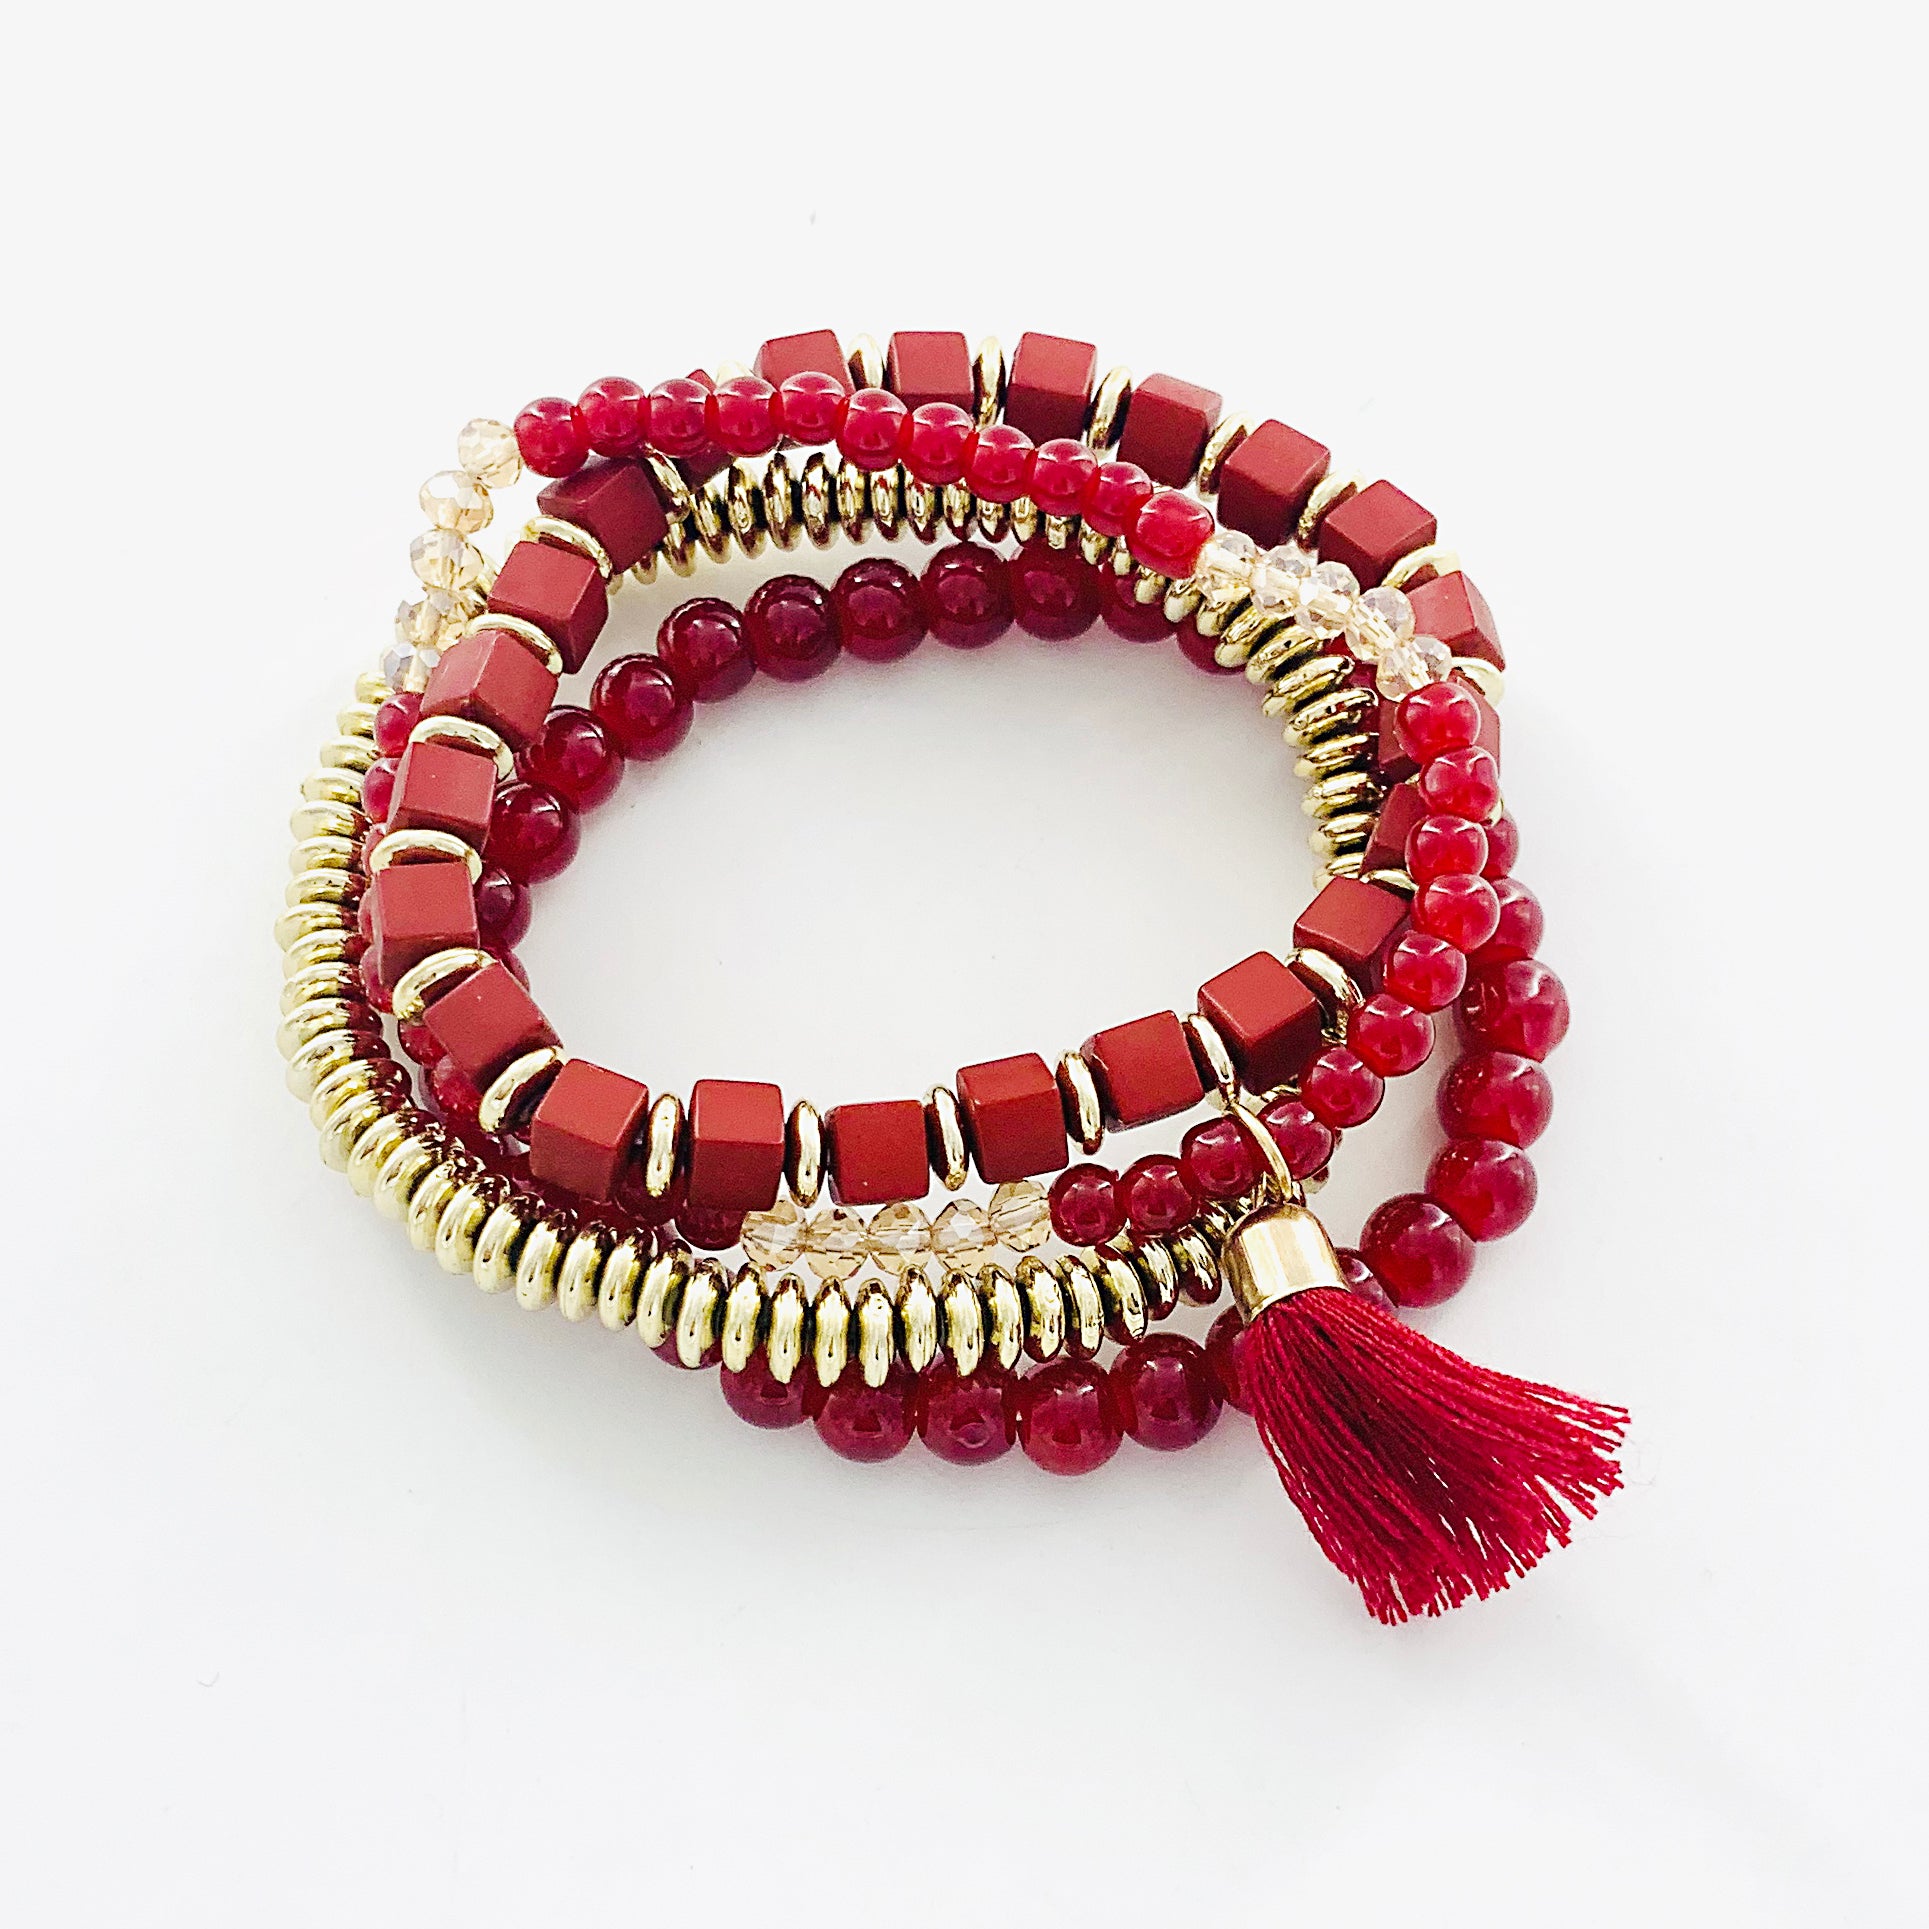 Red and gold multi bracelets with tassel charm